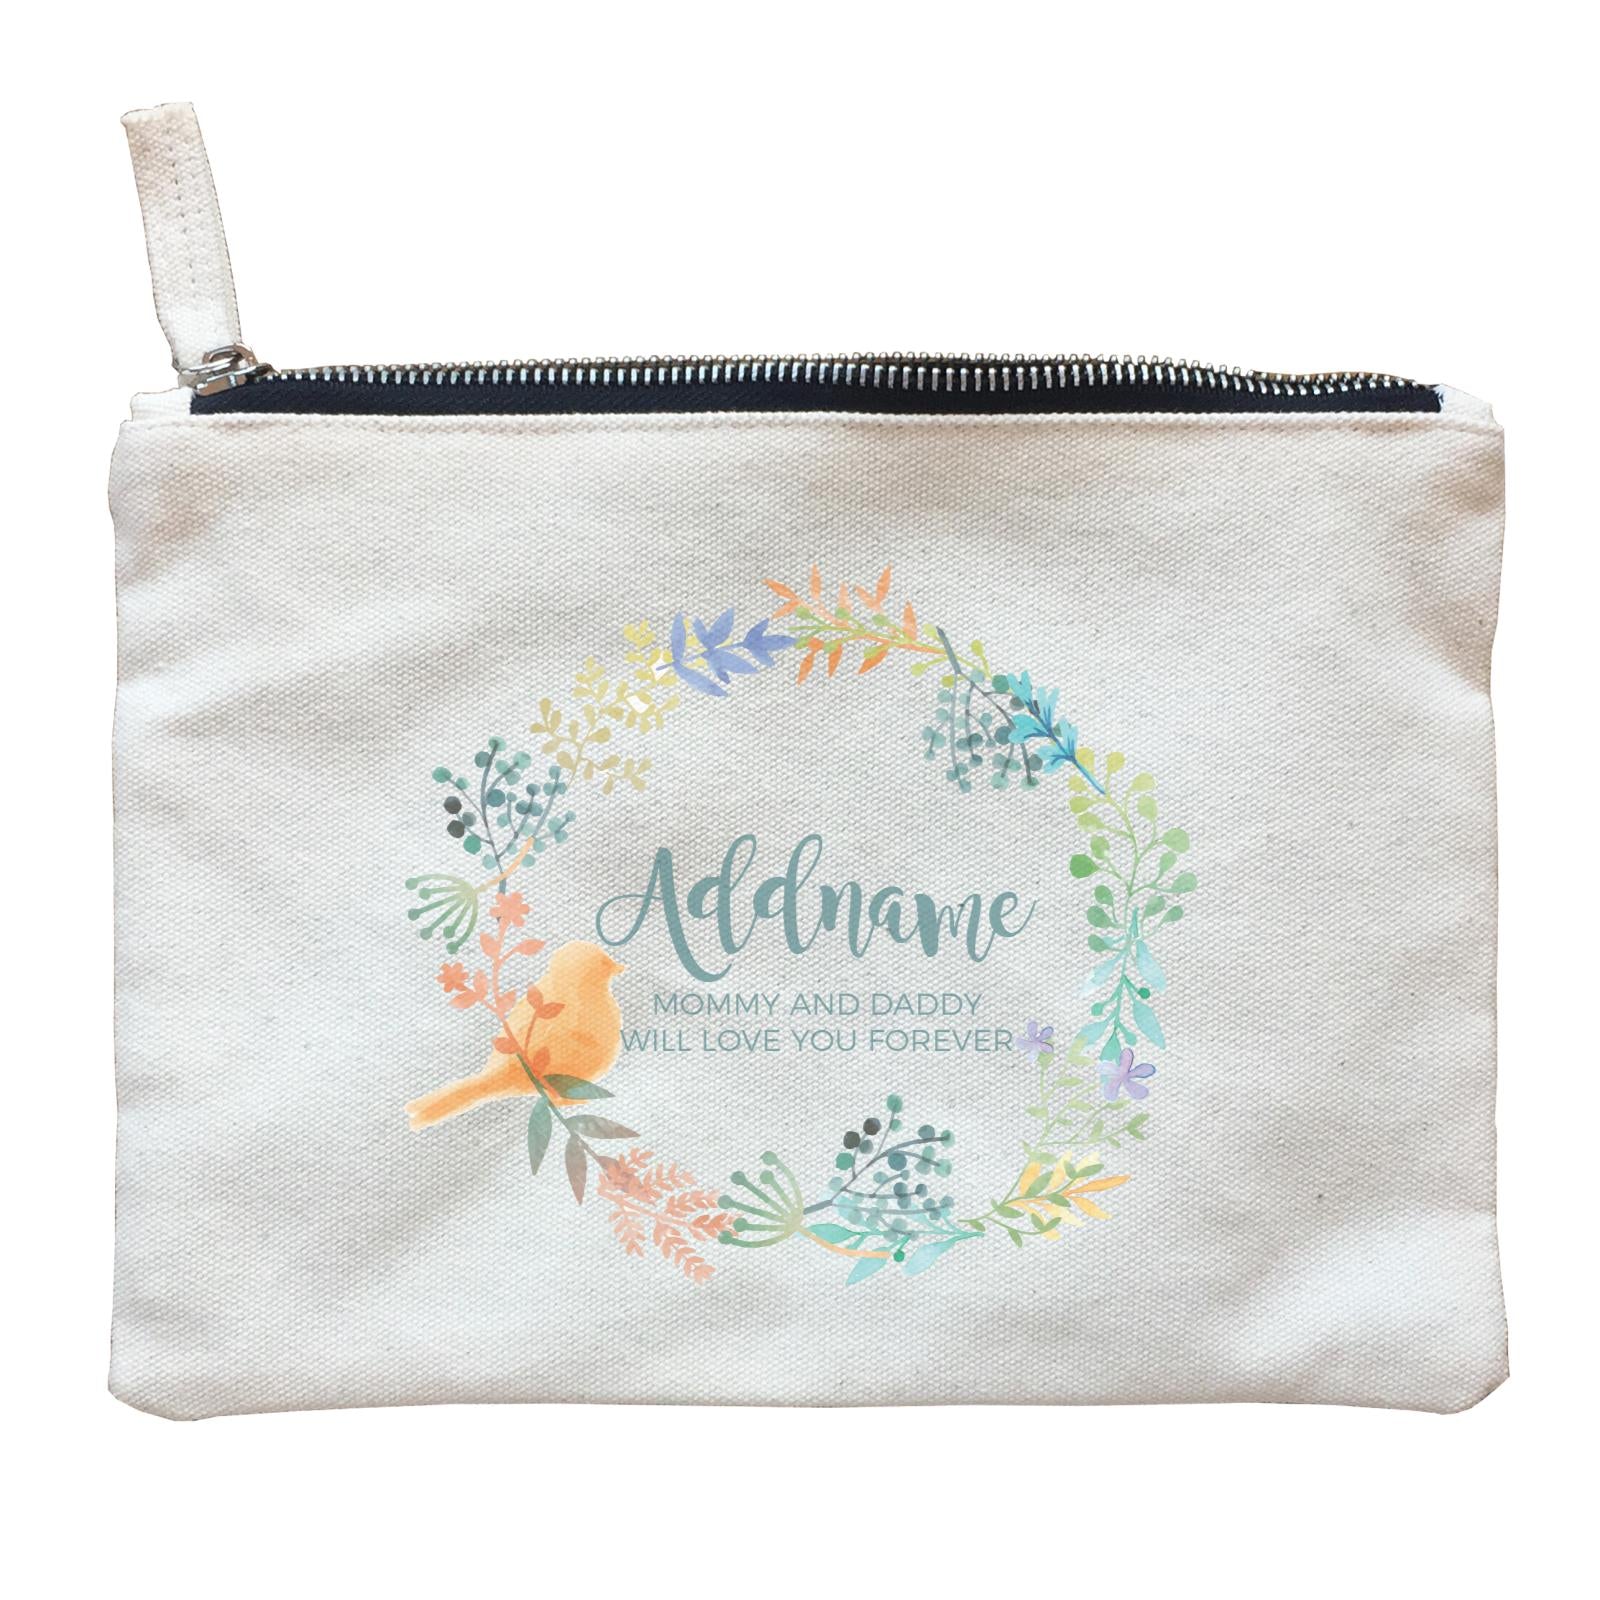 Spring Flower with Bird Wreath Personalizable with Name and Text Zipper Pouch